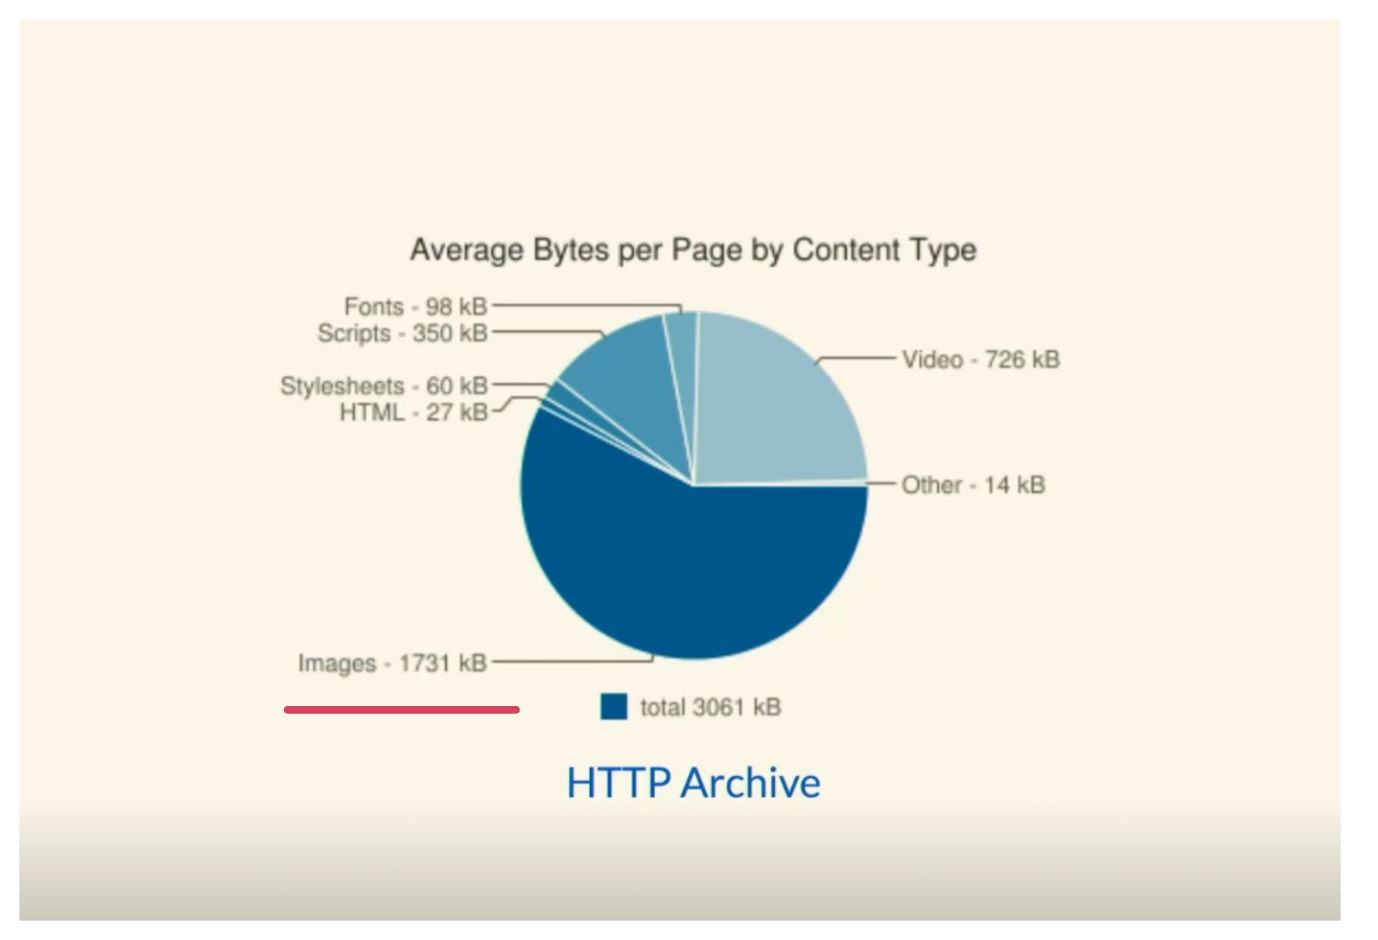 Average Bytes per page by content type